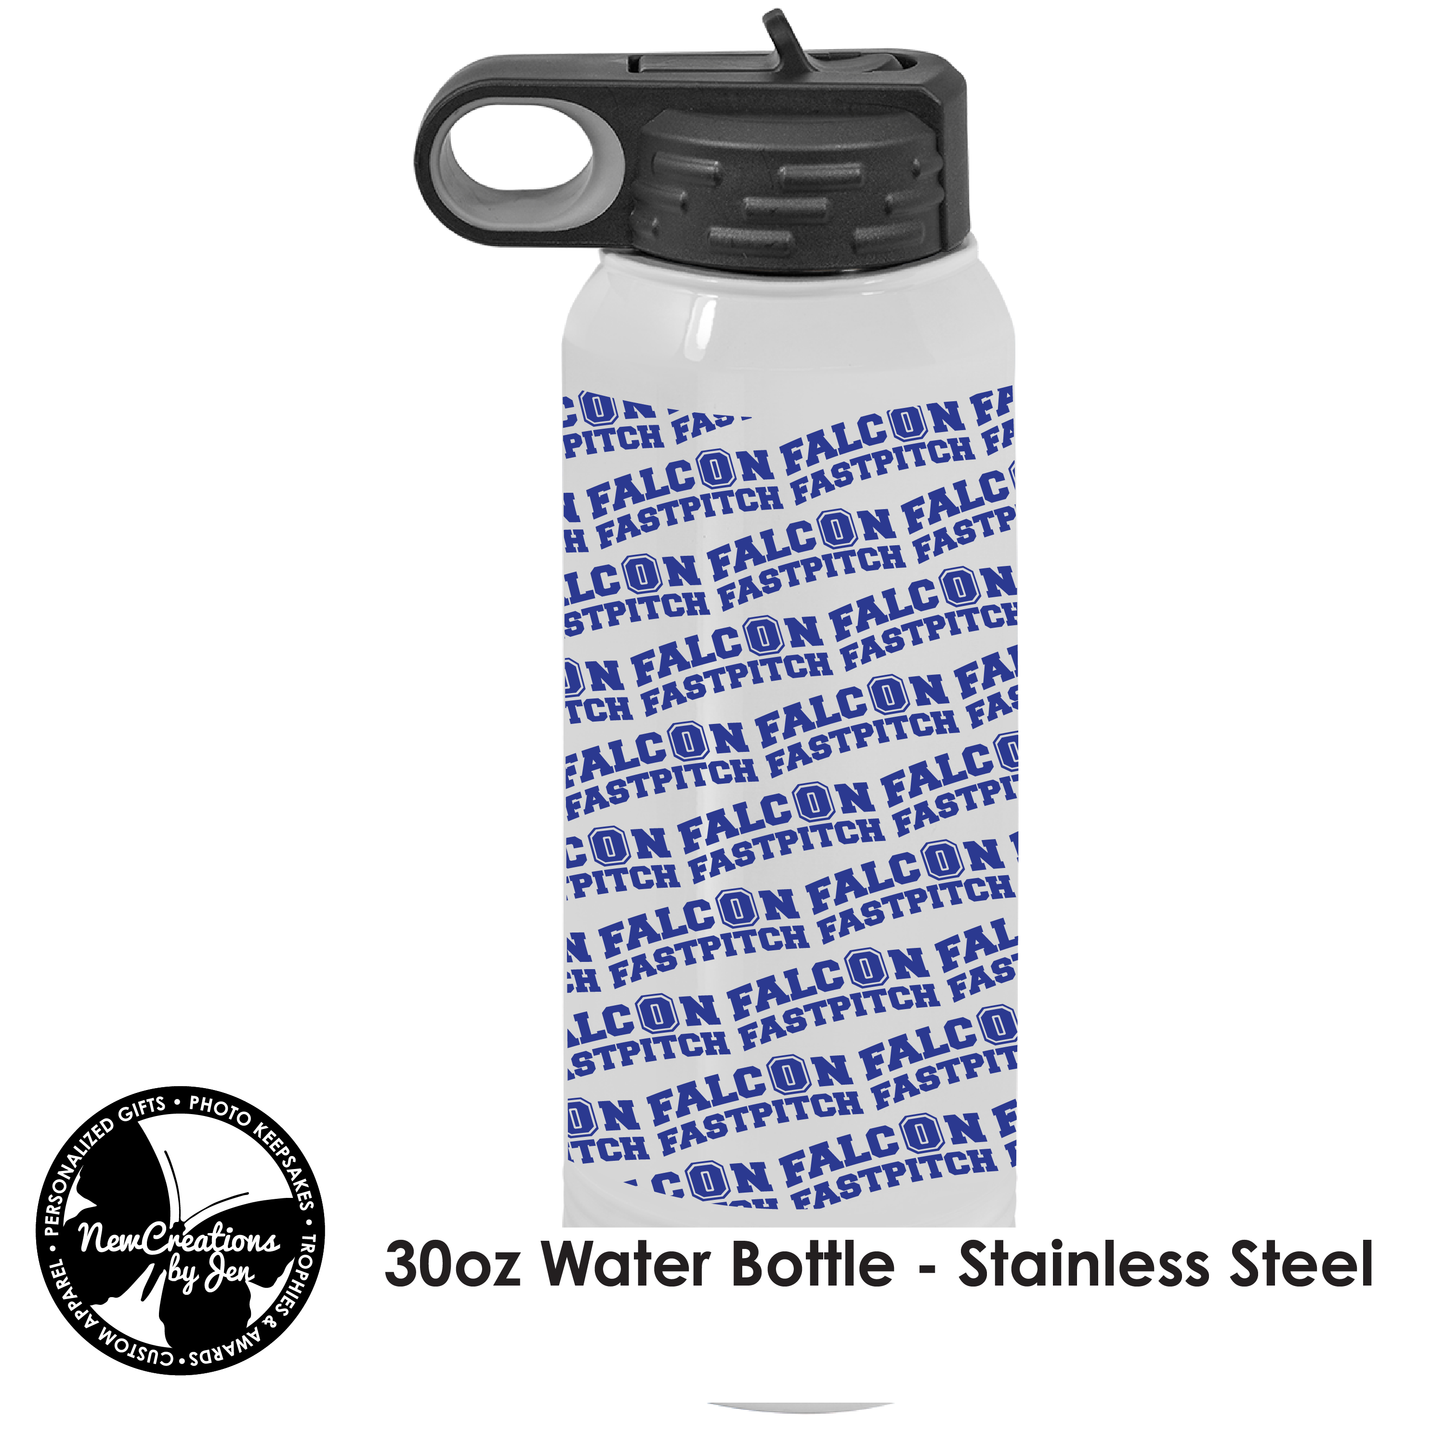 OMS Fastpitch - Stainless Steel Water Bottle